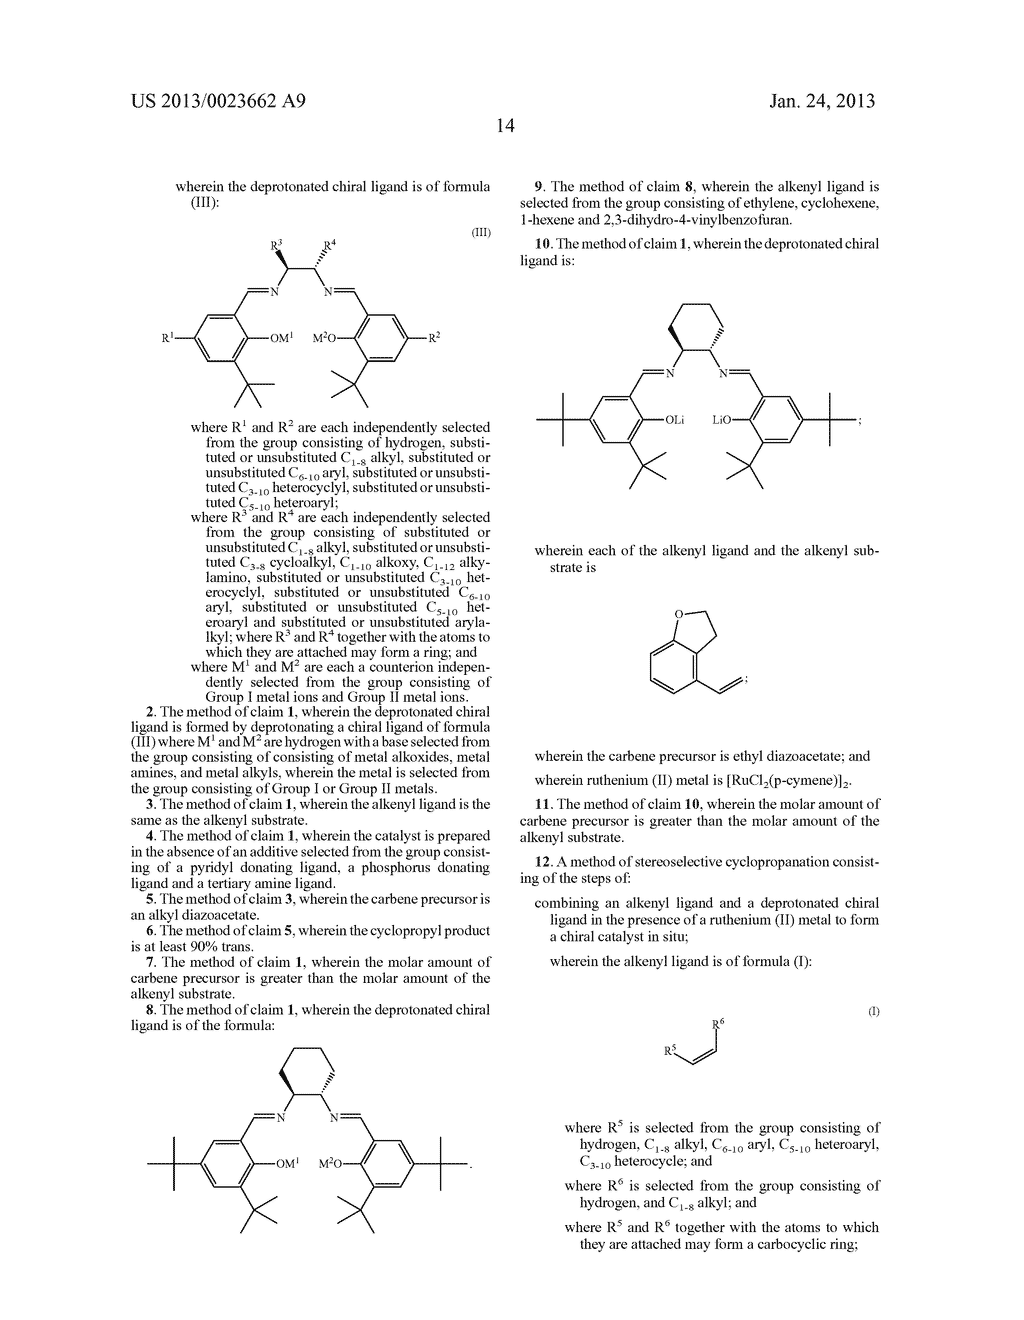 RUTHENIUM (II) CATALYSTS FOR USE IN STEREOSELECTIVE CYCLOPROPANATIONS - diagram, schematic, and image 15